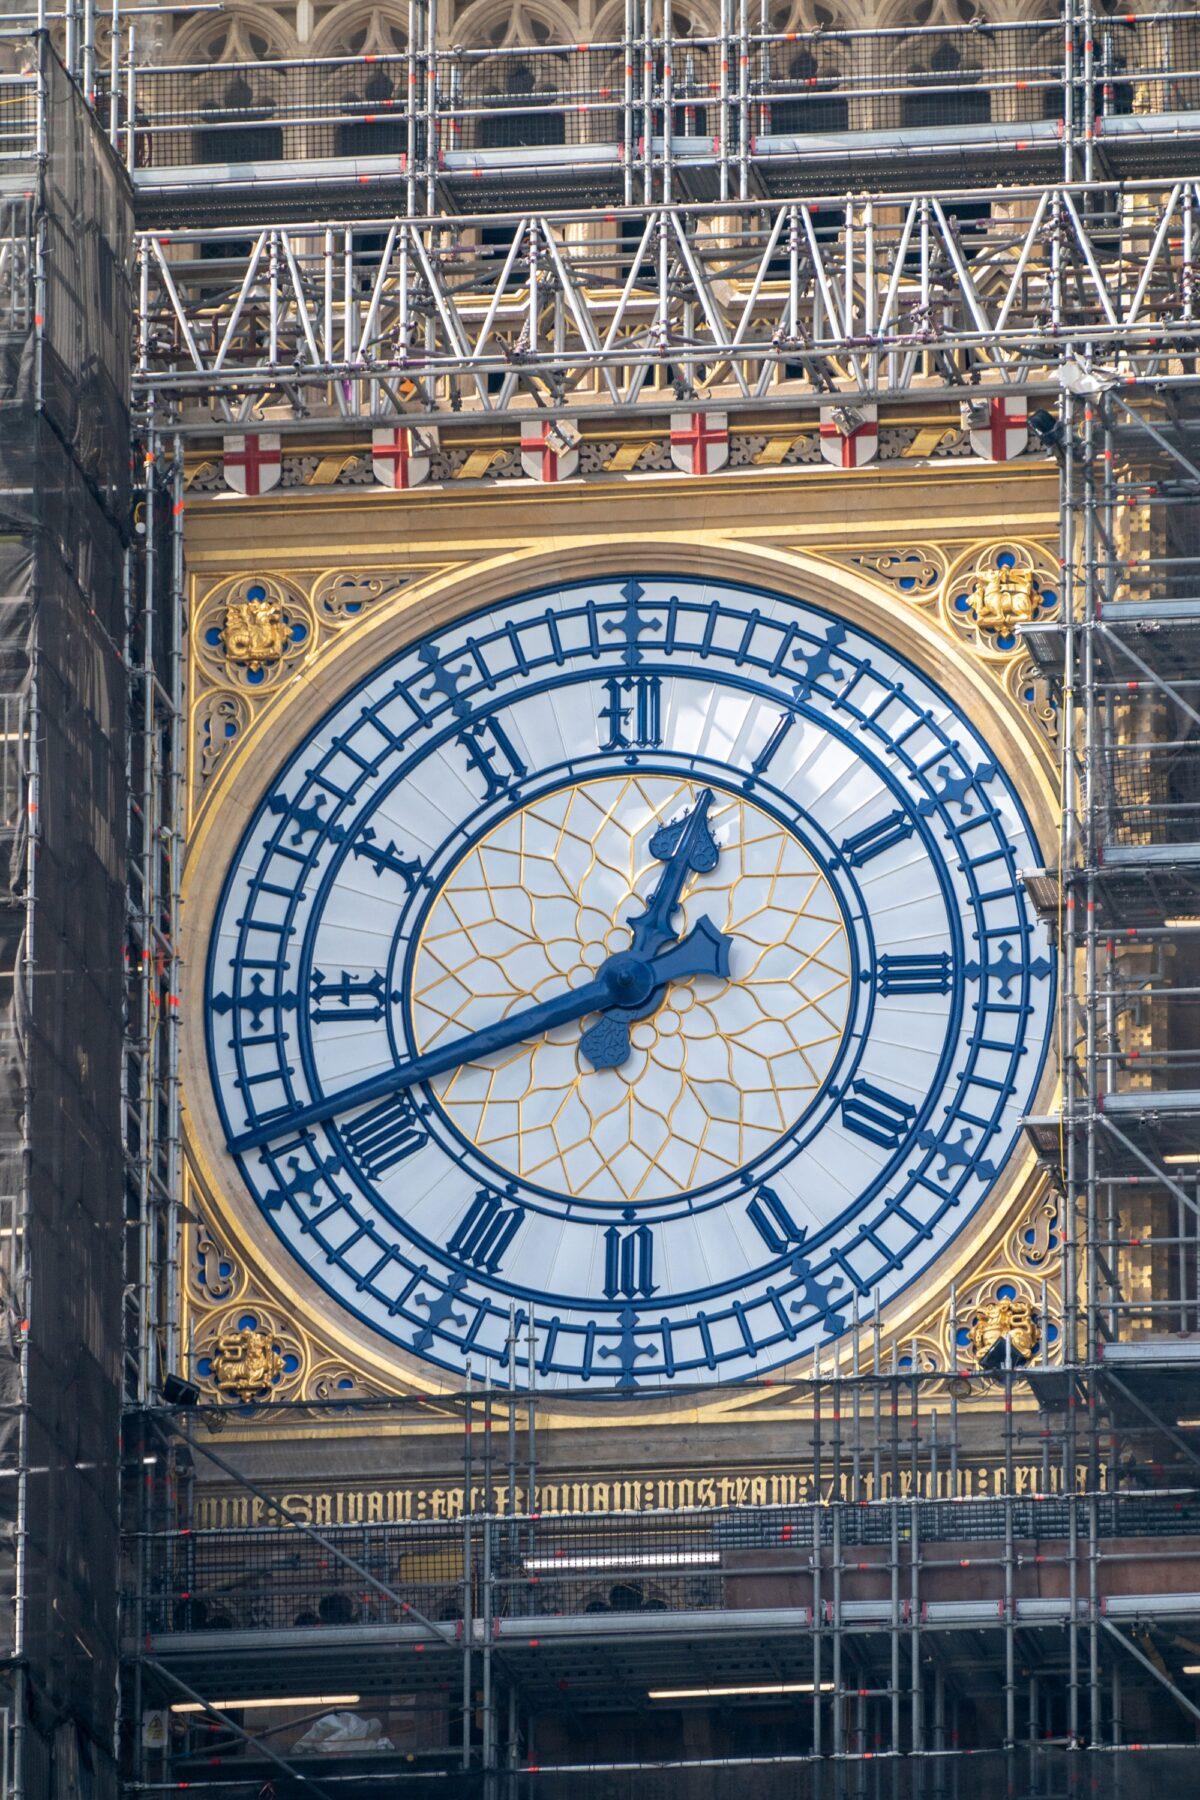 The St. George’s cross shields above the Big Ben clock face have been painted red and white, in central London on Sept. 6, 2021. (Stefan Rousseau/PA)